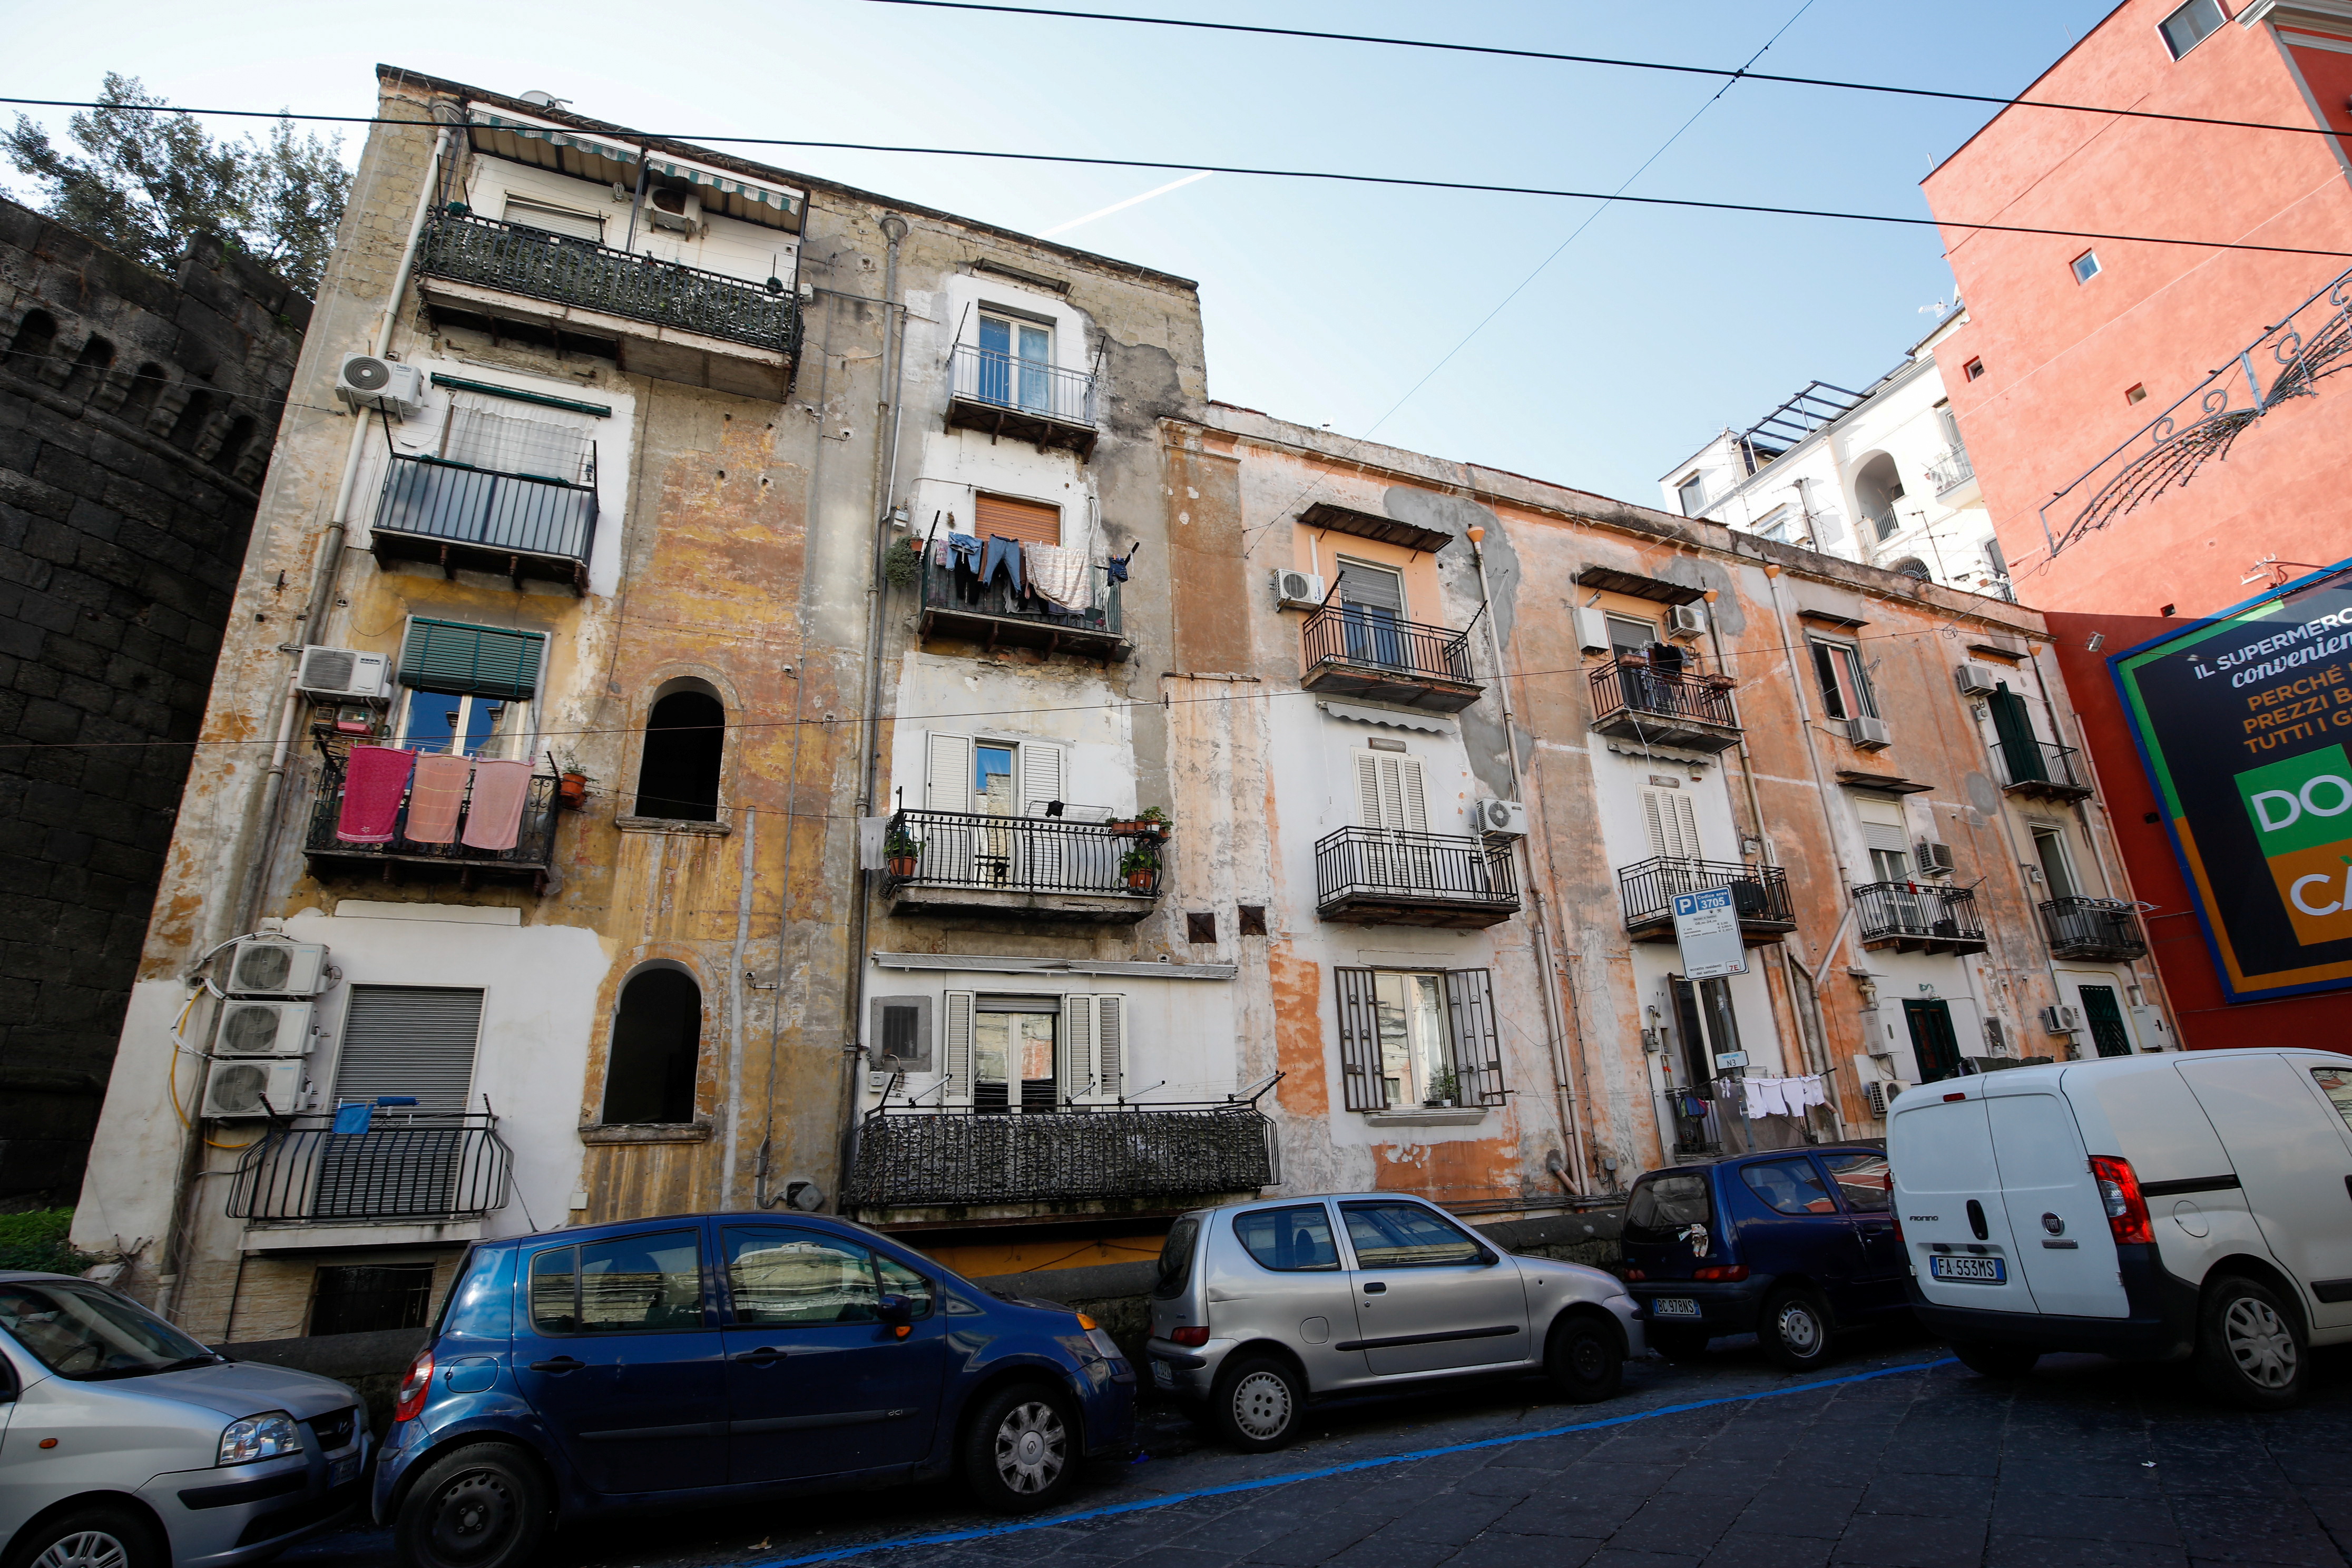 A dilapidated building is seen in Naples